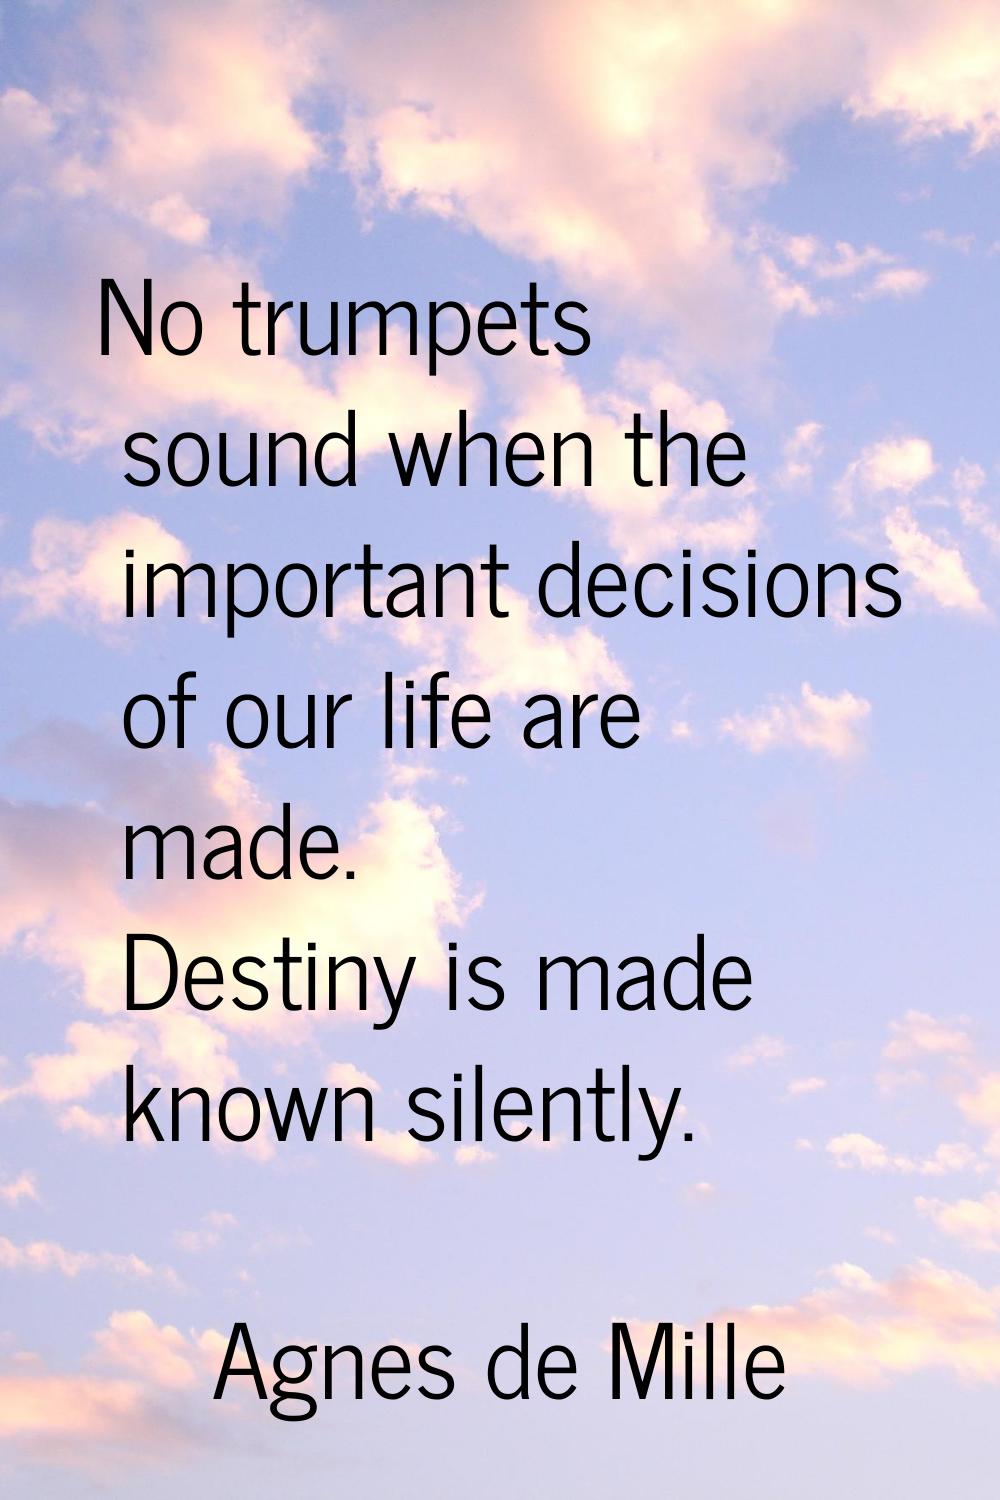 No trumpets sound when the important decisions of our life are made. Destiny is made known silently